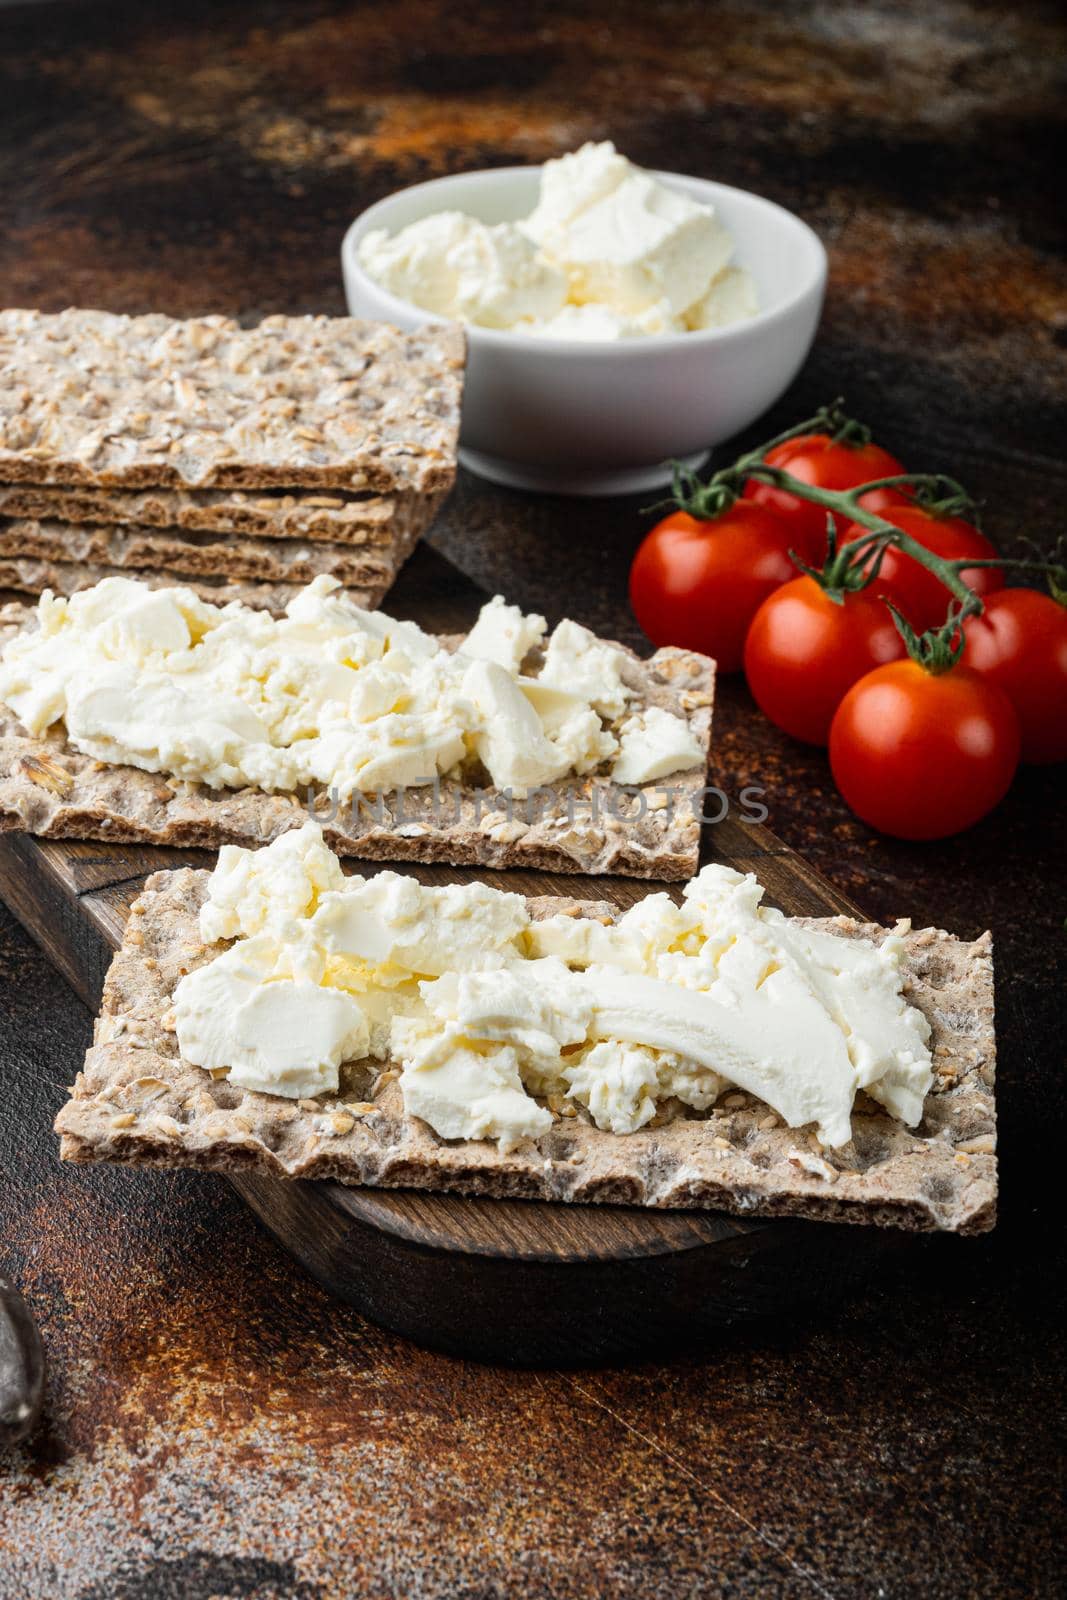 Crisp bread with cream cheese, on old dark rustic table background by Ilianesolenyi